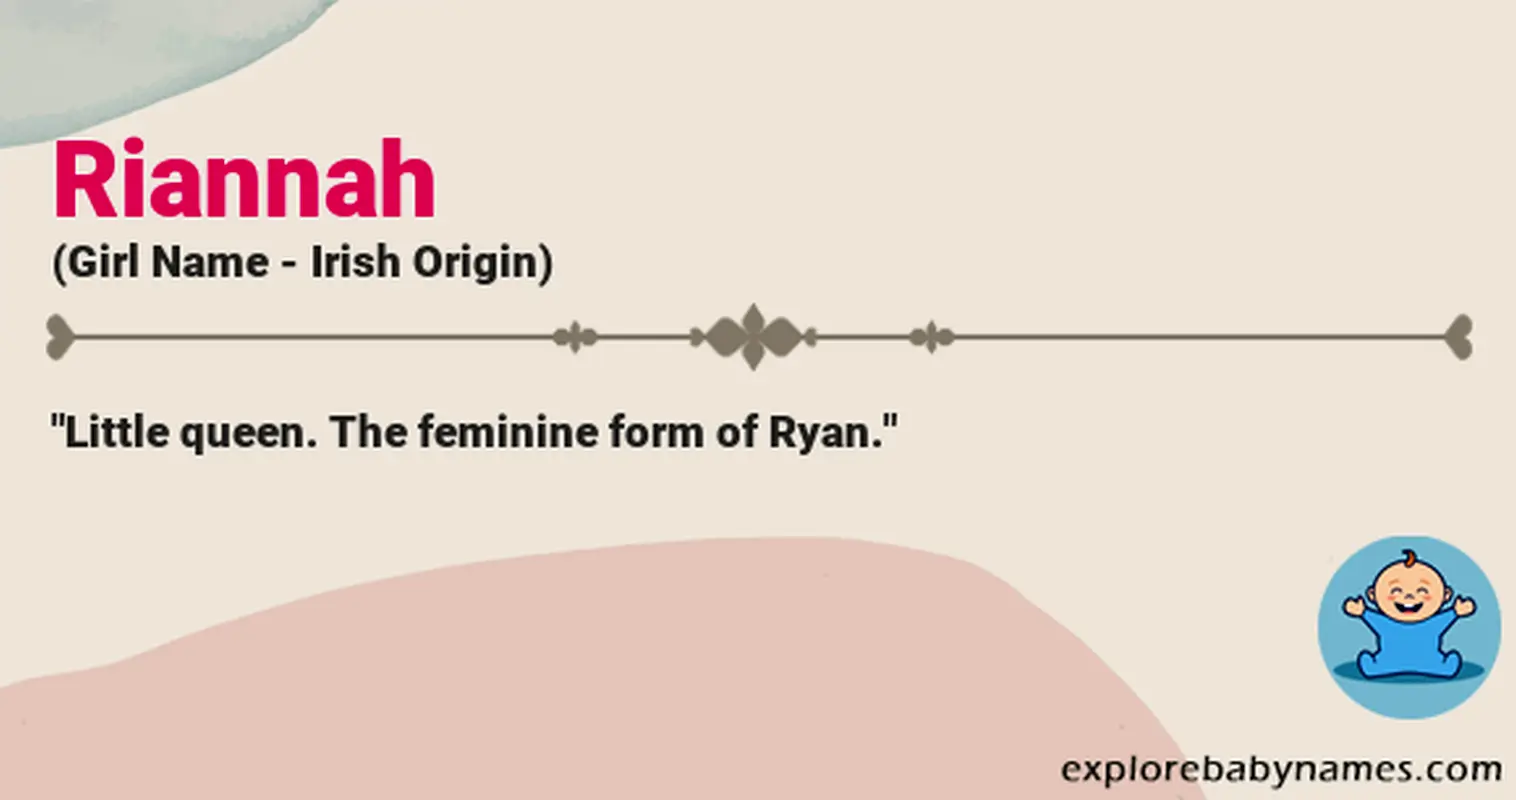 Meaning of Riannah